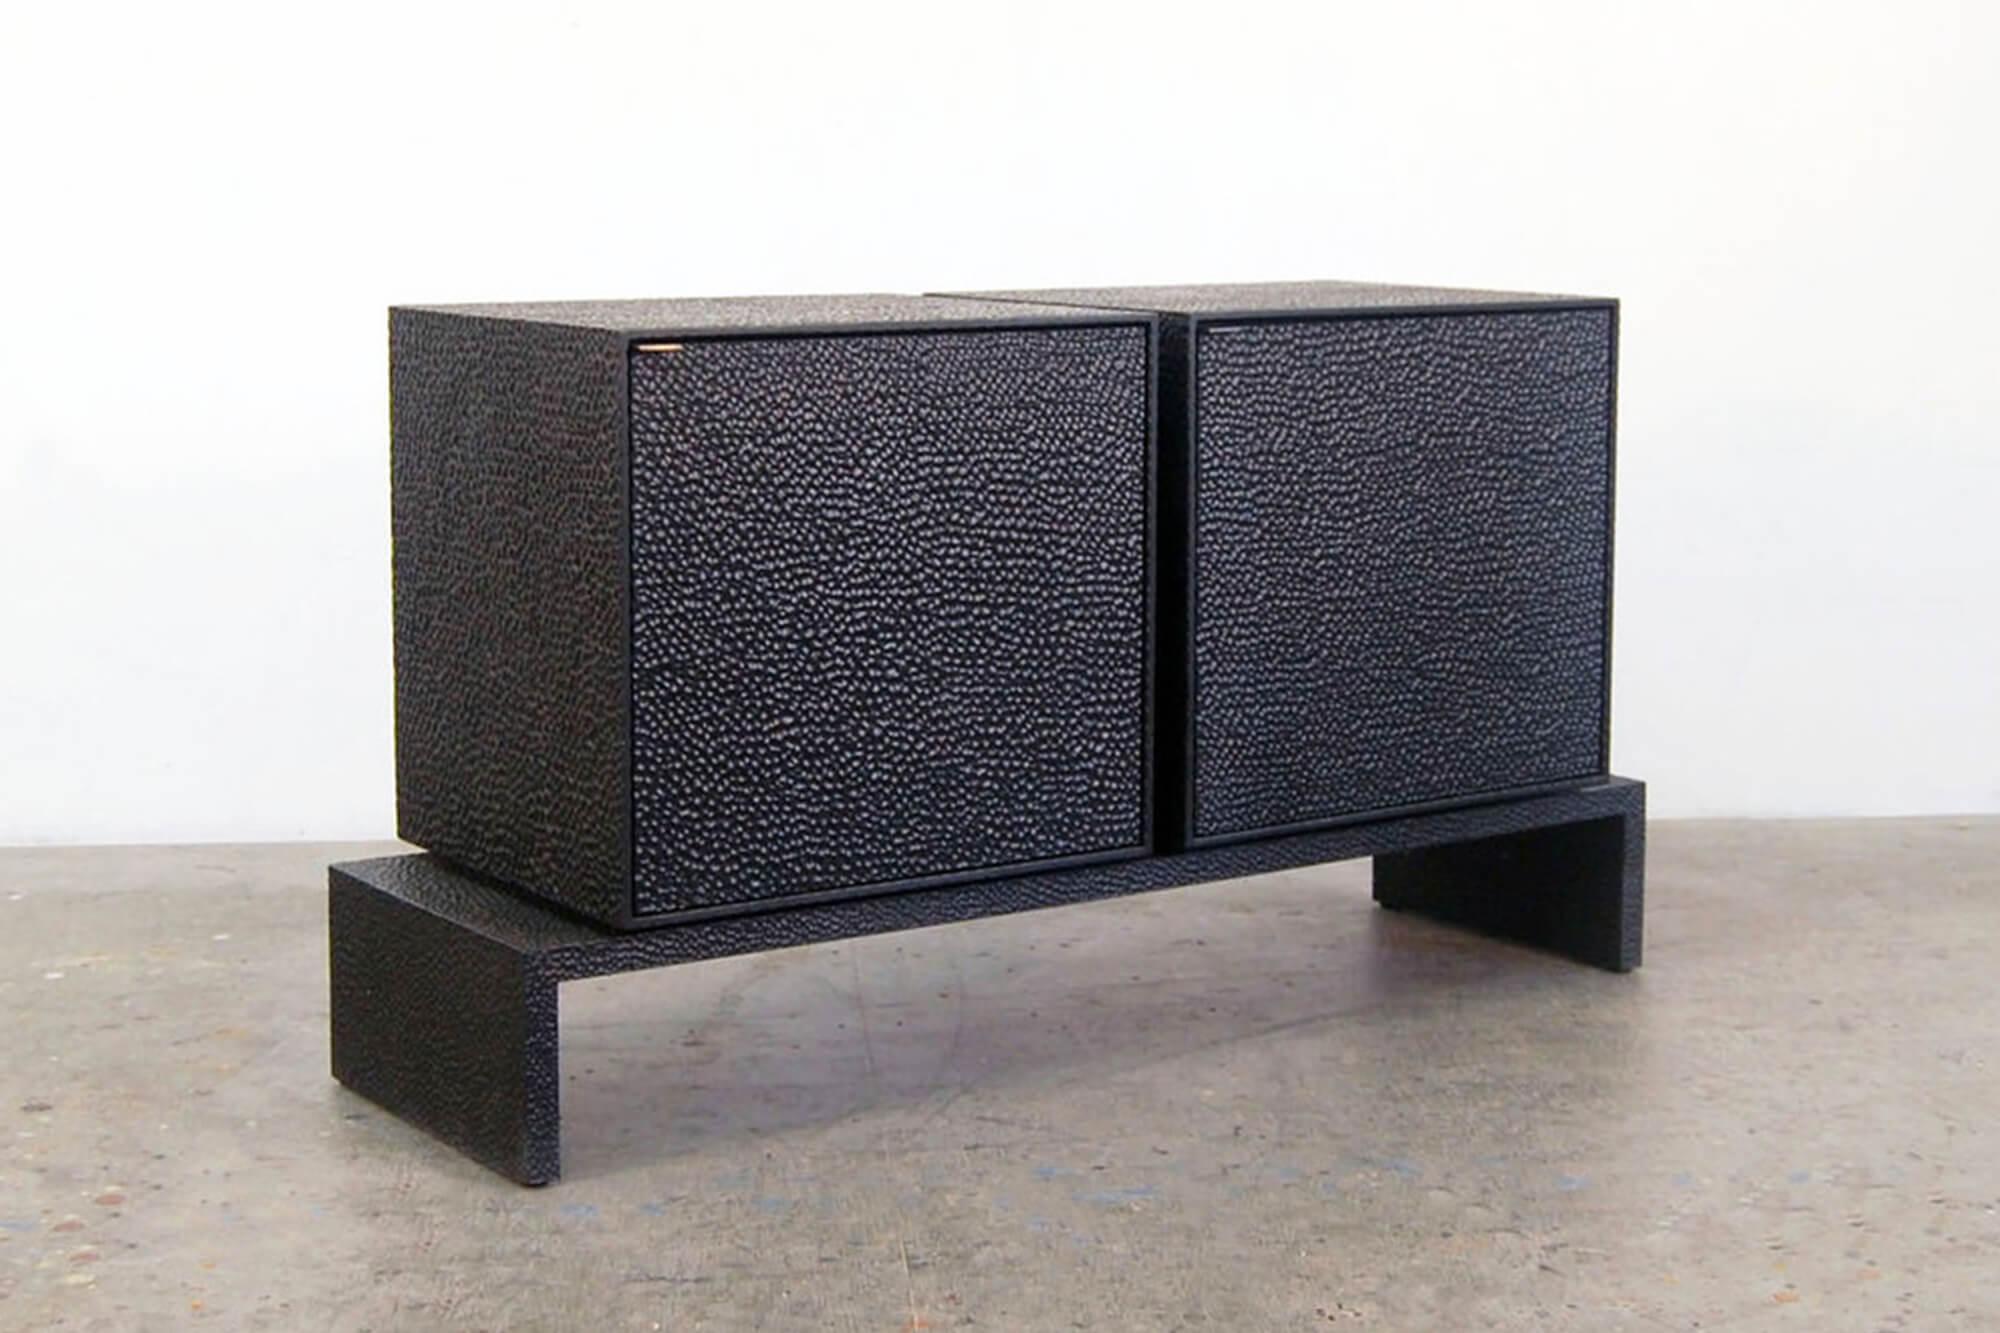 This elevated credenza from John Eric Byers merges bold, modern geometries with traditional craft. The cabinets and platform are hand-carved and lacquered with a distinctive textured pattern to give a sophisticated finish to a simplified